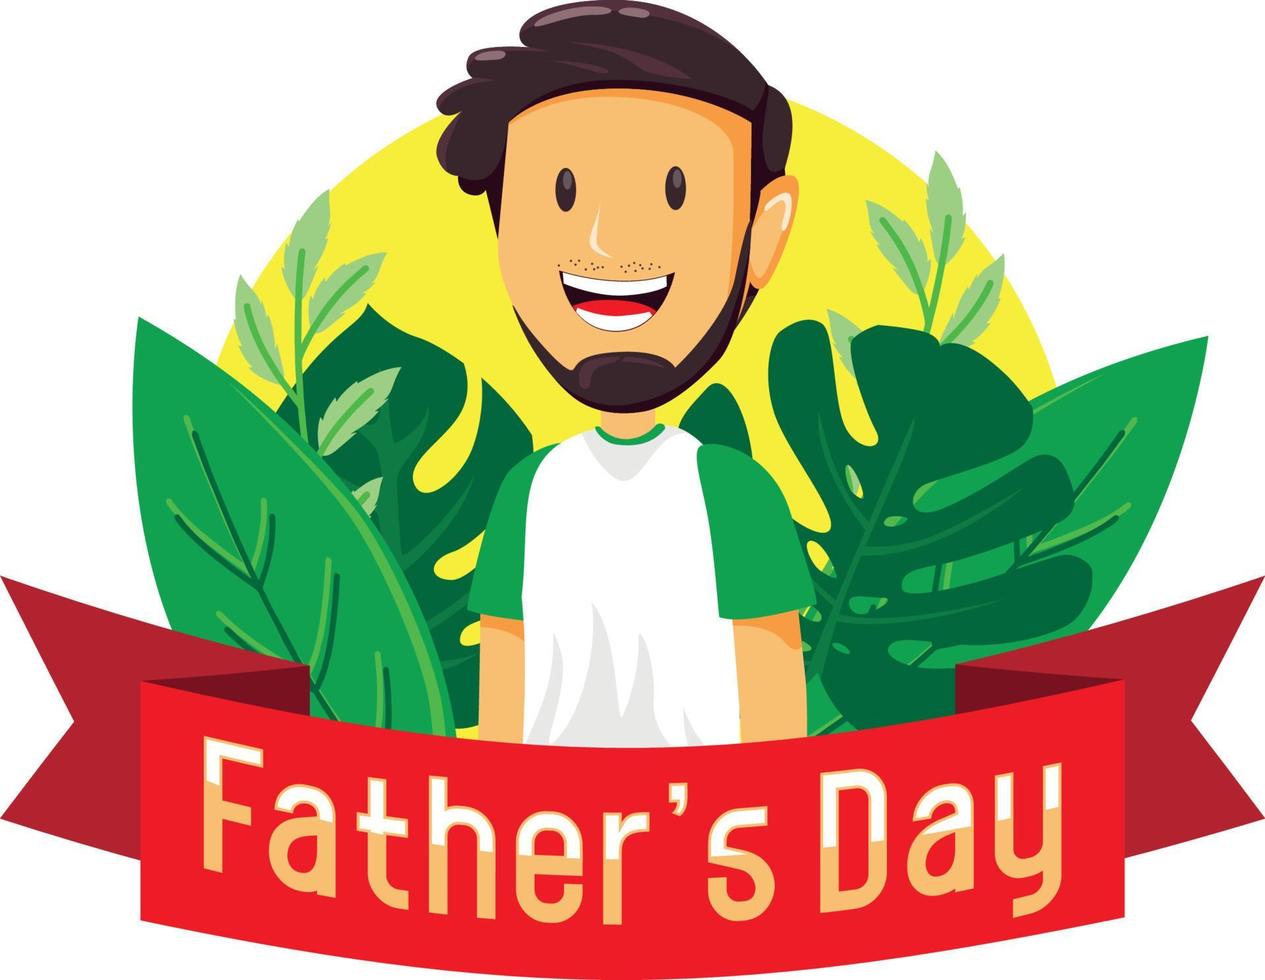 Father in father's day red ribbon and green leaves ornament vector